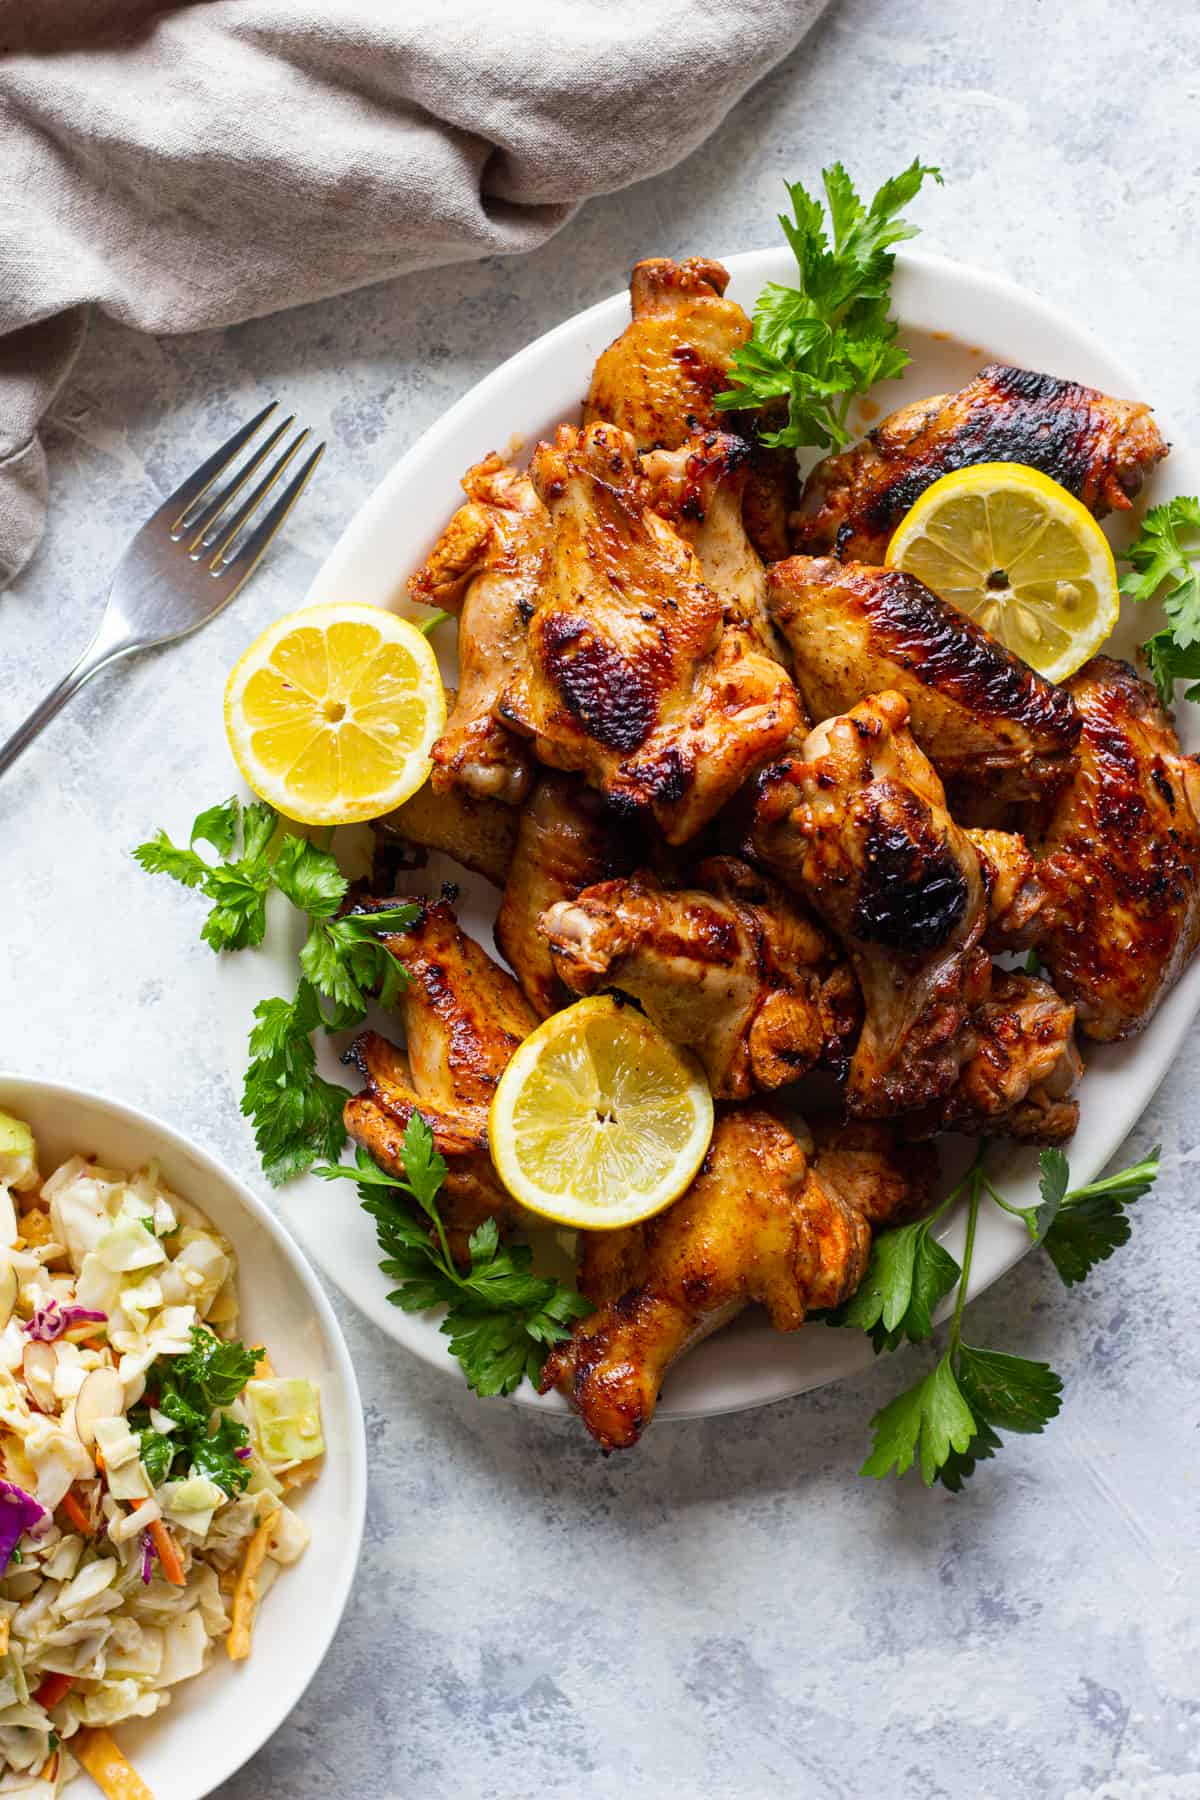 Spicy grilled chicken wings are everyone's favorite. Juicy chicken wings are marinated in hot sauce and grilled to perfection. Follow my step by step recipe for instructions to make these wings on your grill.
